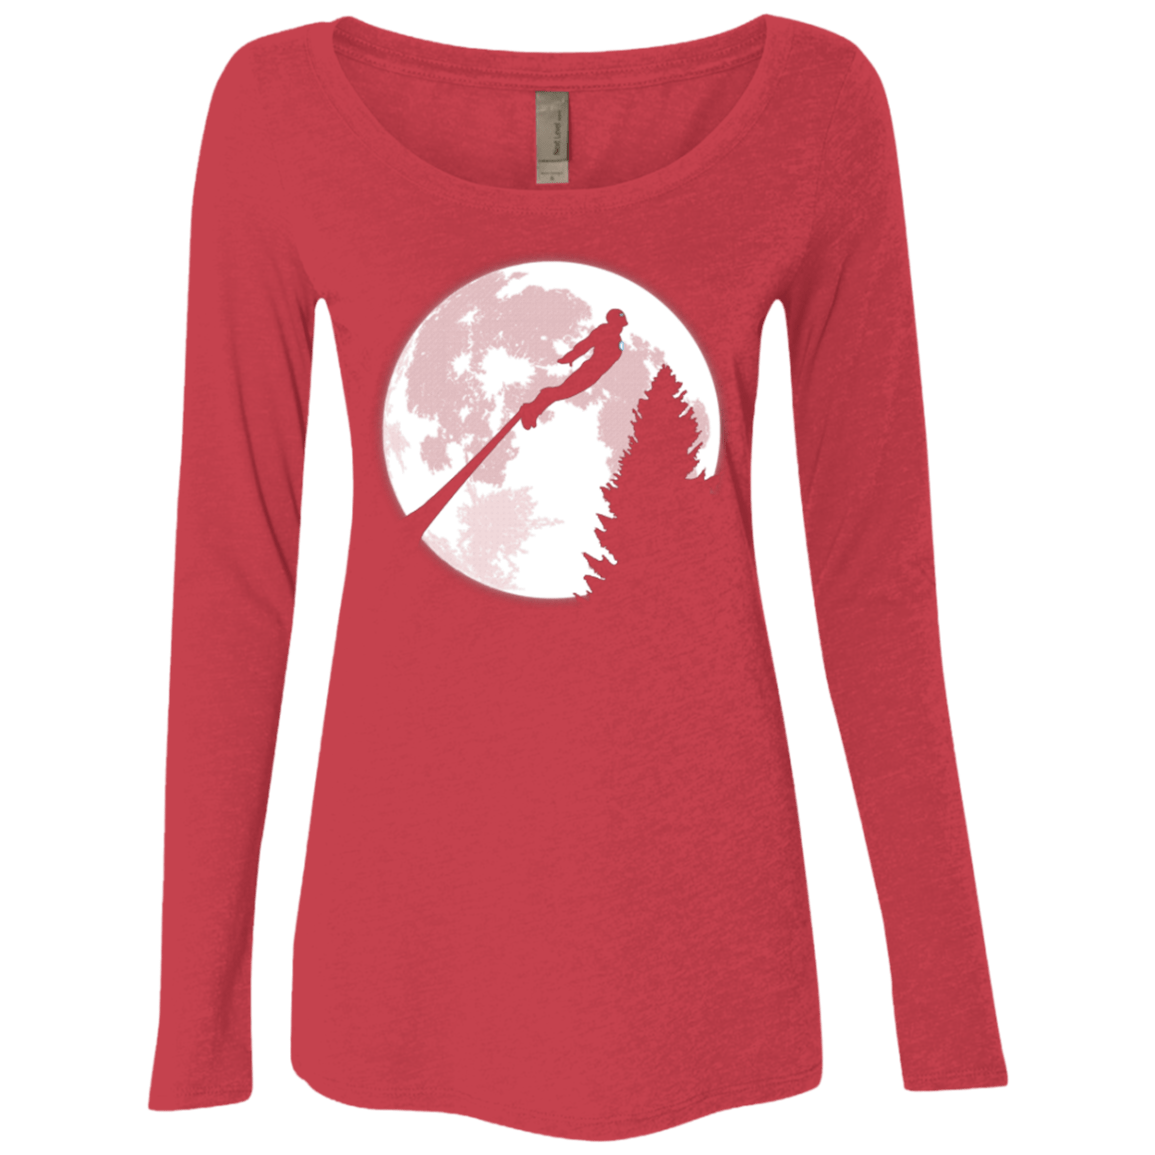 T-Shirts Vintage Red / Small I.M Women's Triblend Long Sleeve Shirt